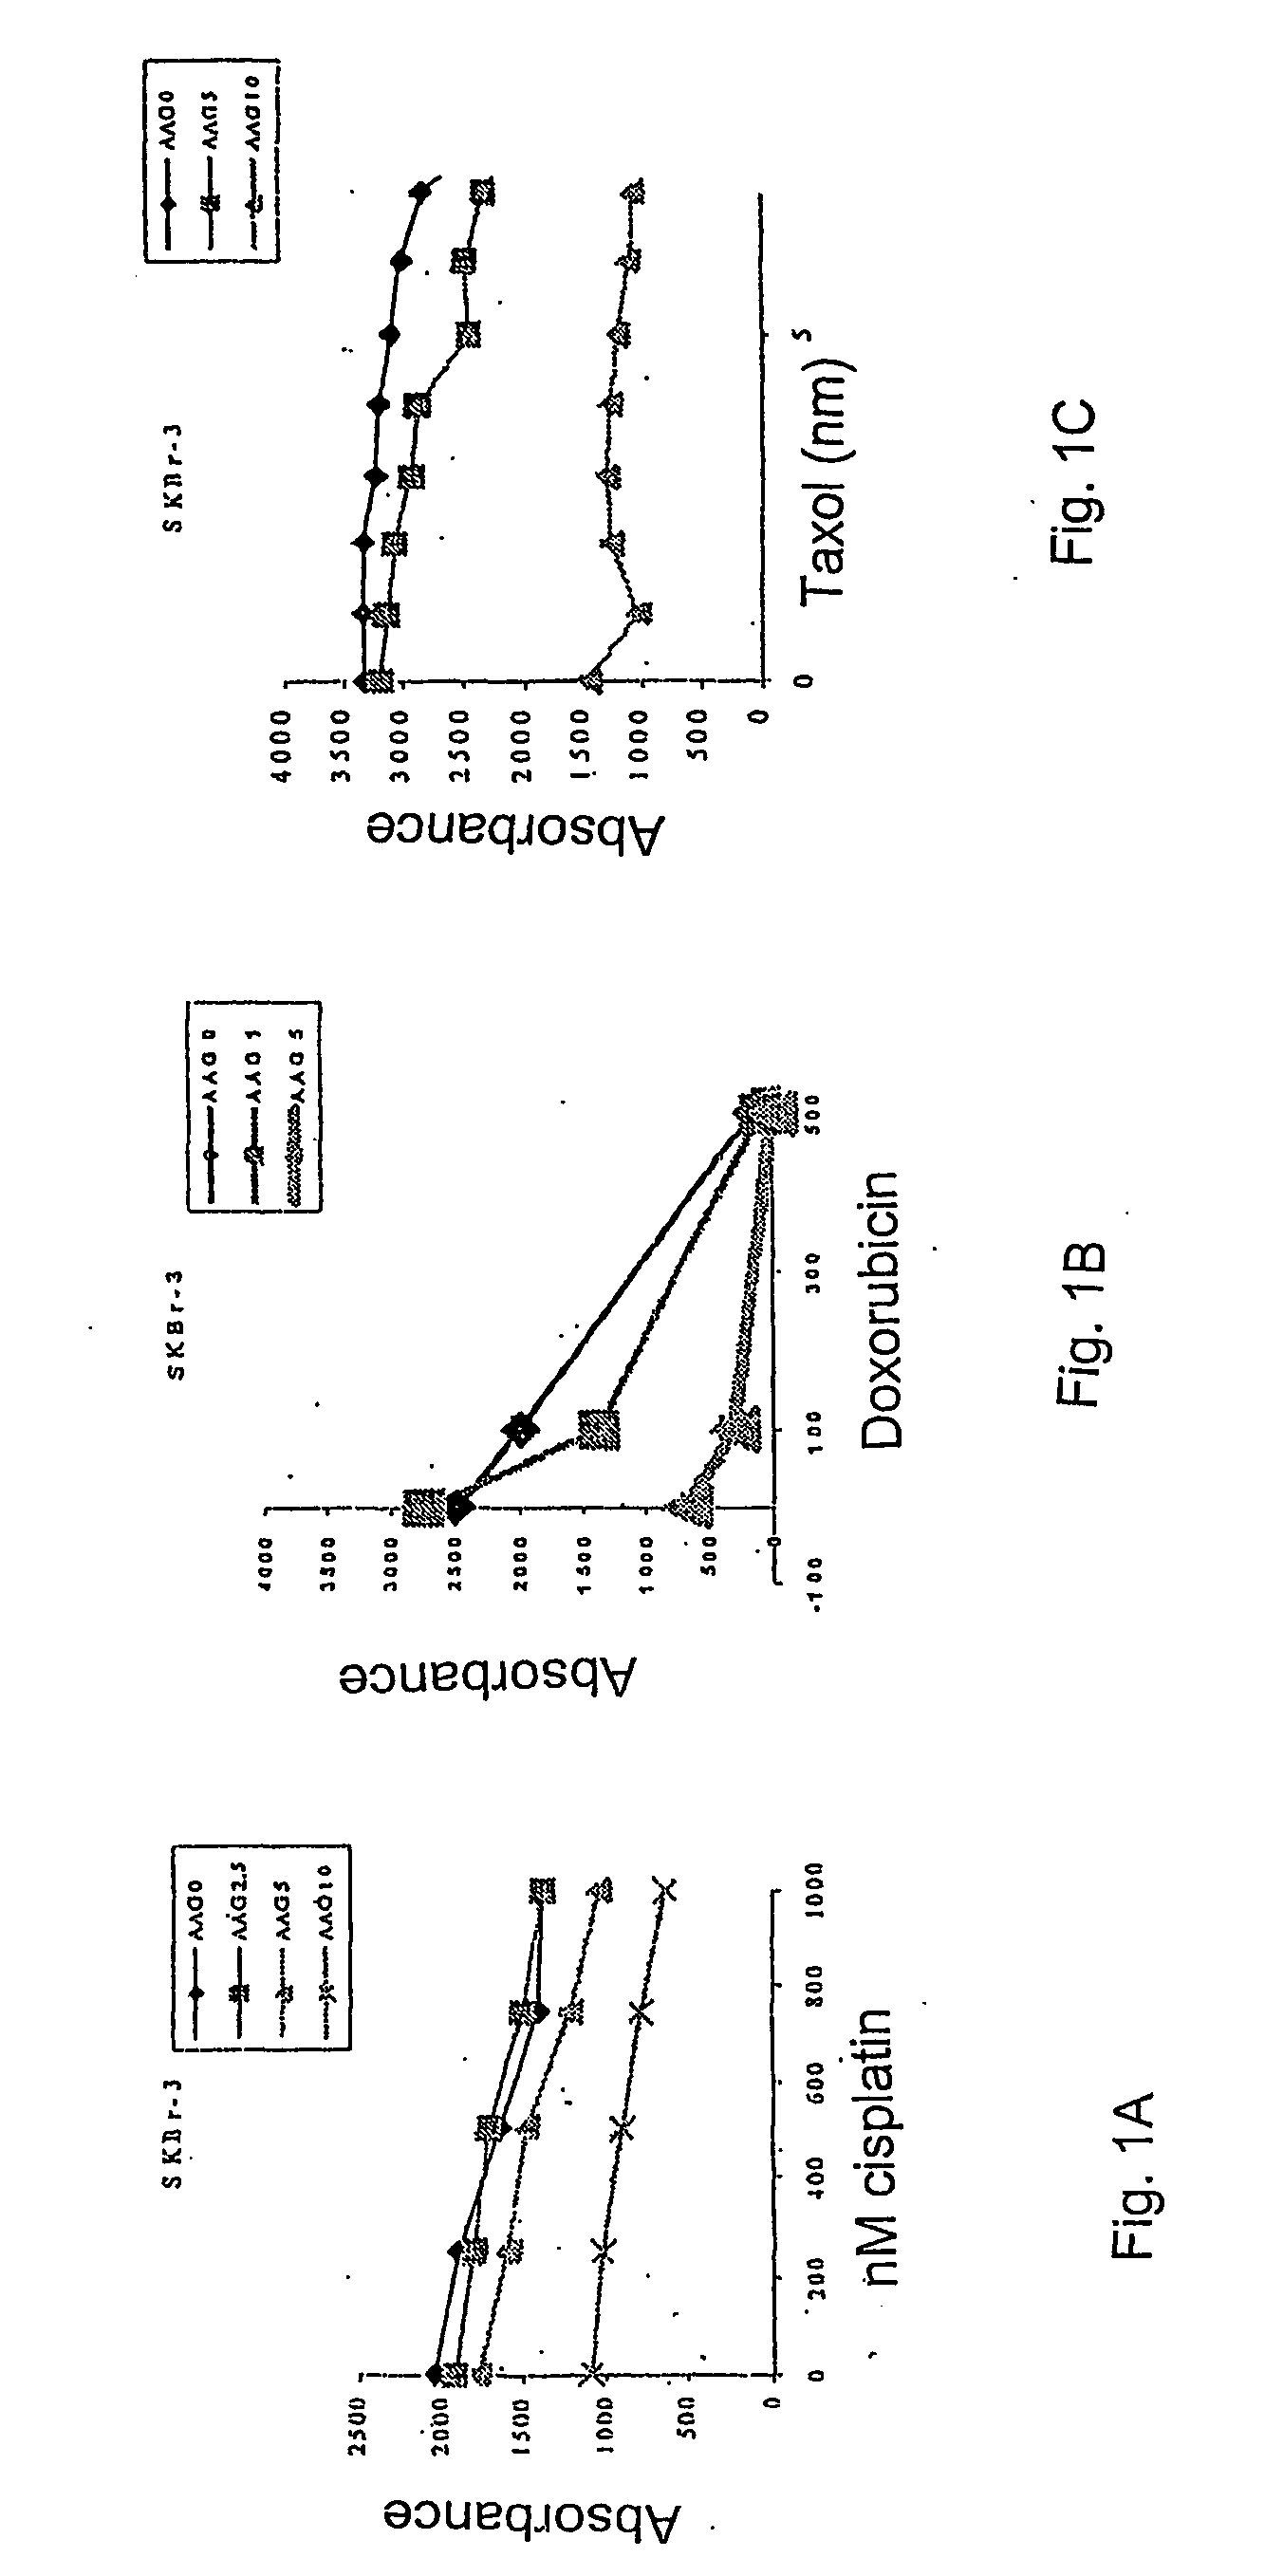 Methods for enhancing the efficacy of cytotoxic agents through the use of hsp90 inhibitors